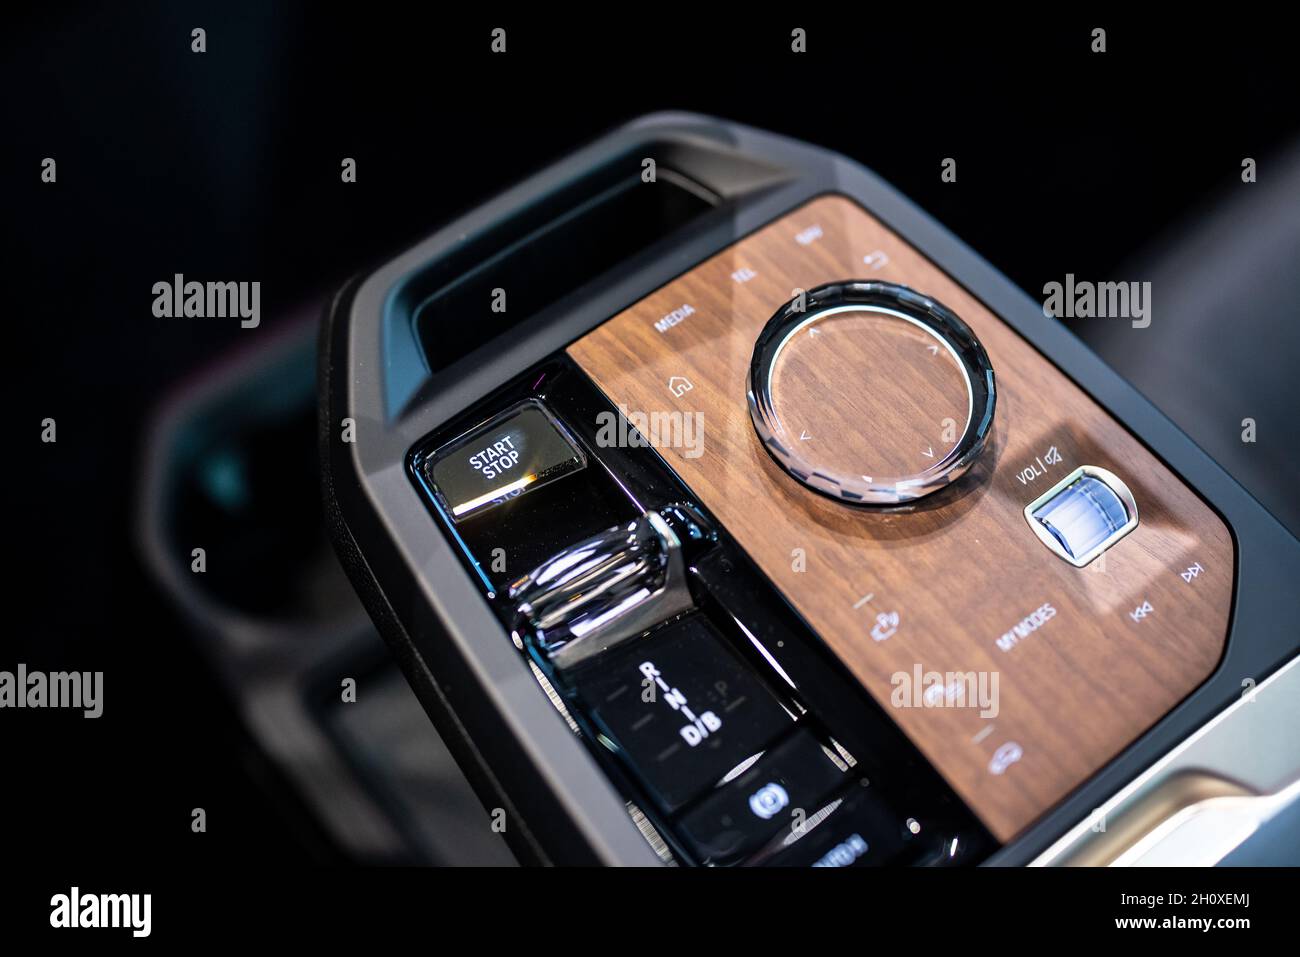 Garching, Germany. 29th Sep, 2021. The iDrive controller for controlling the various infotainment systems, as well as the paddle shifter, are seen on the center console inside a BMW iX during a BMW press event. Credit: Matthias Balk/dpa/Alamy Live News Stock Photo